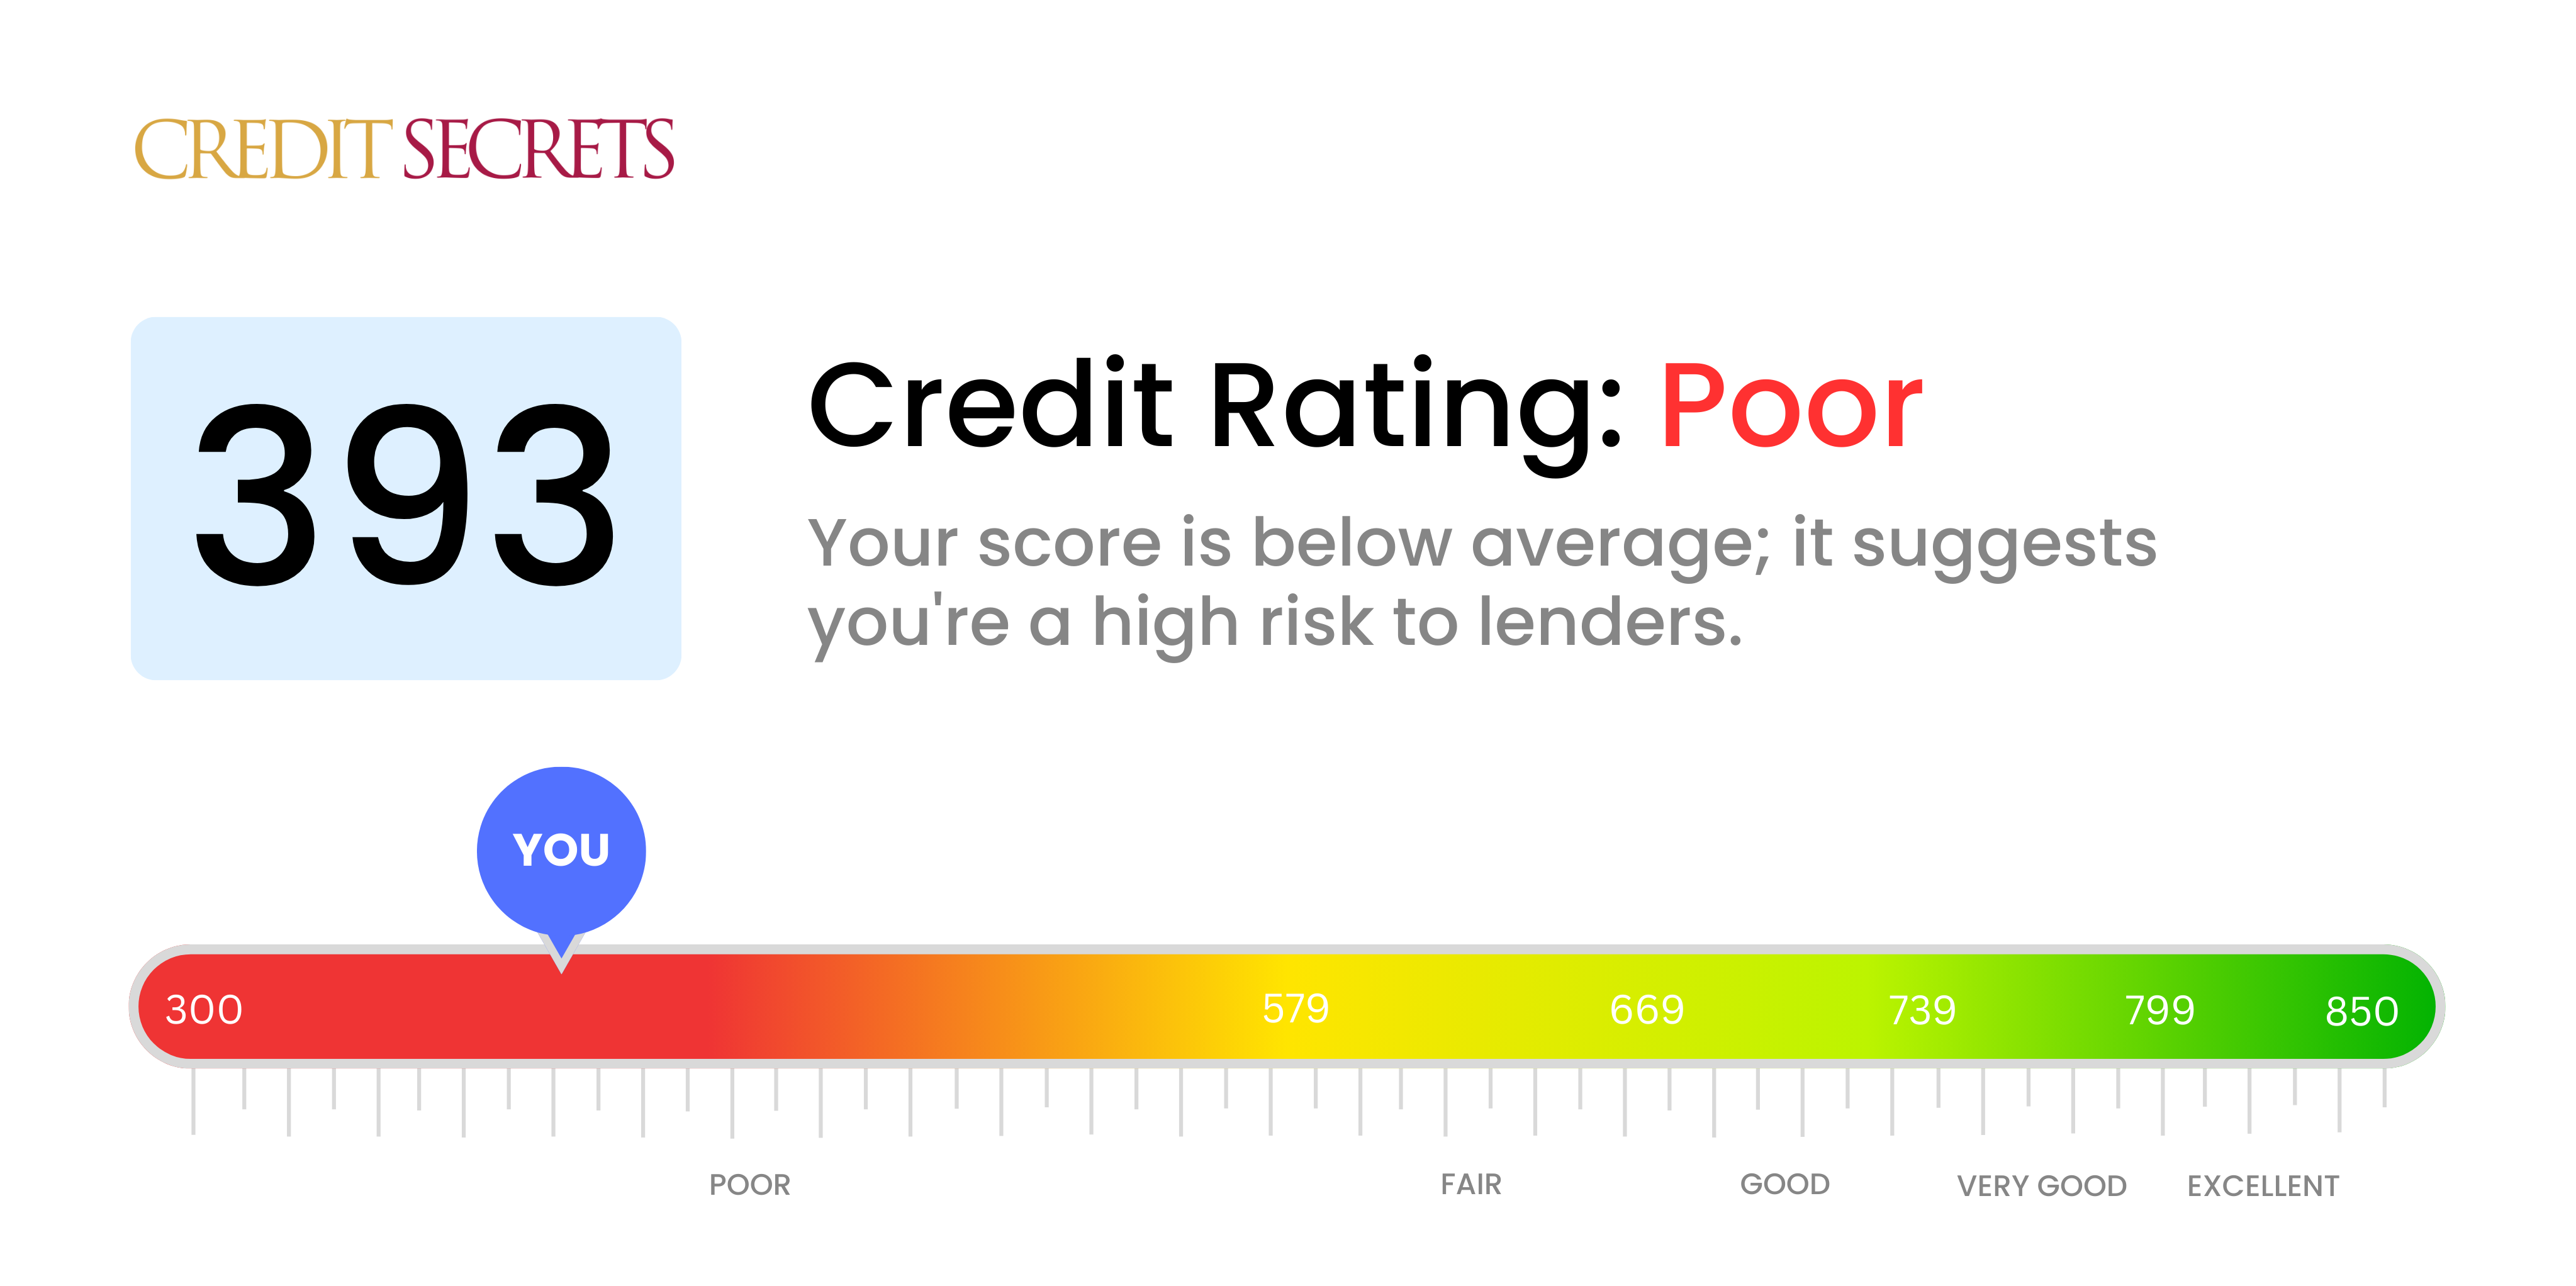 Is 393 a good credit score?